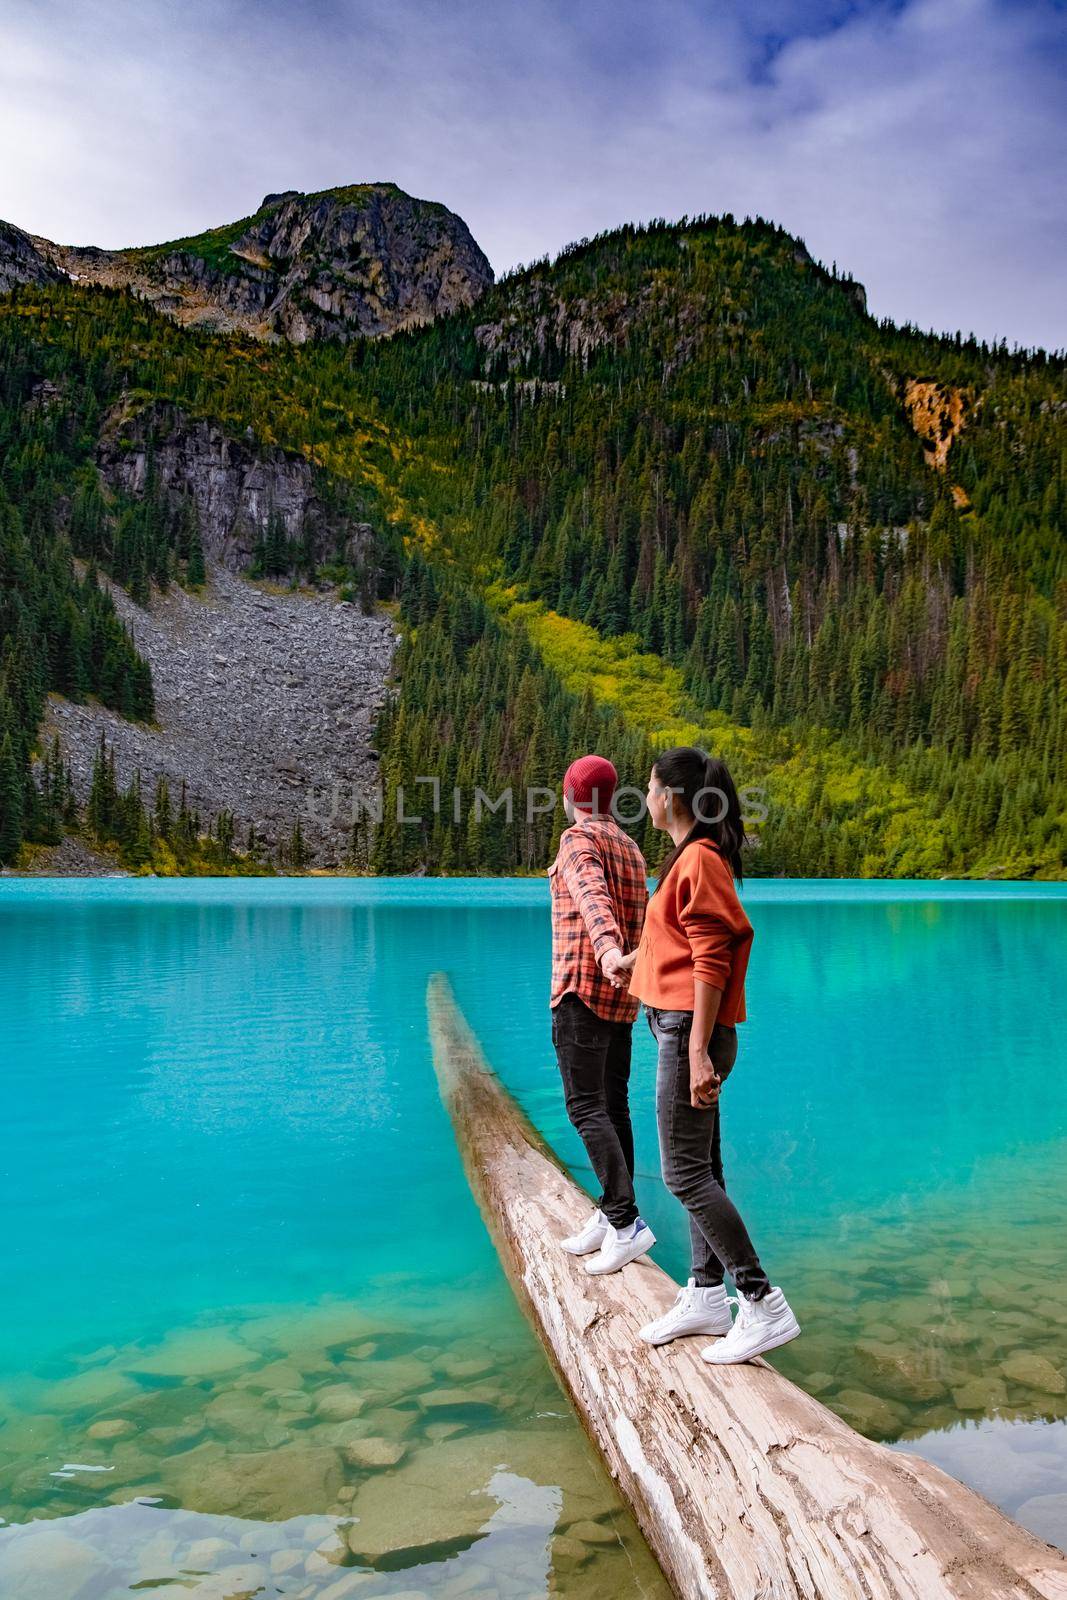 Majestic mountain lake in Canada. Upper Joffre Lake Trail View, couple visit Joffre Lakes Provincial Park - Middle Lake. British Colmbia Canada